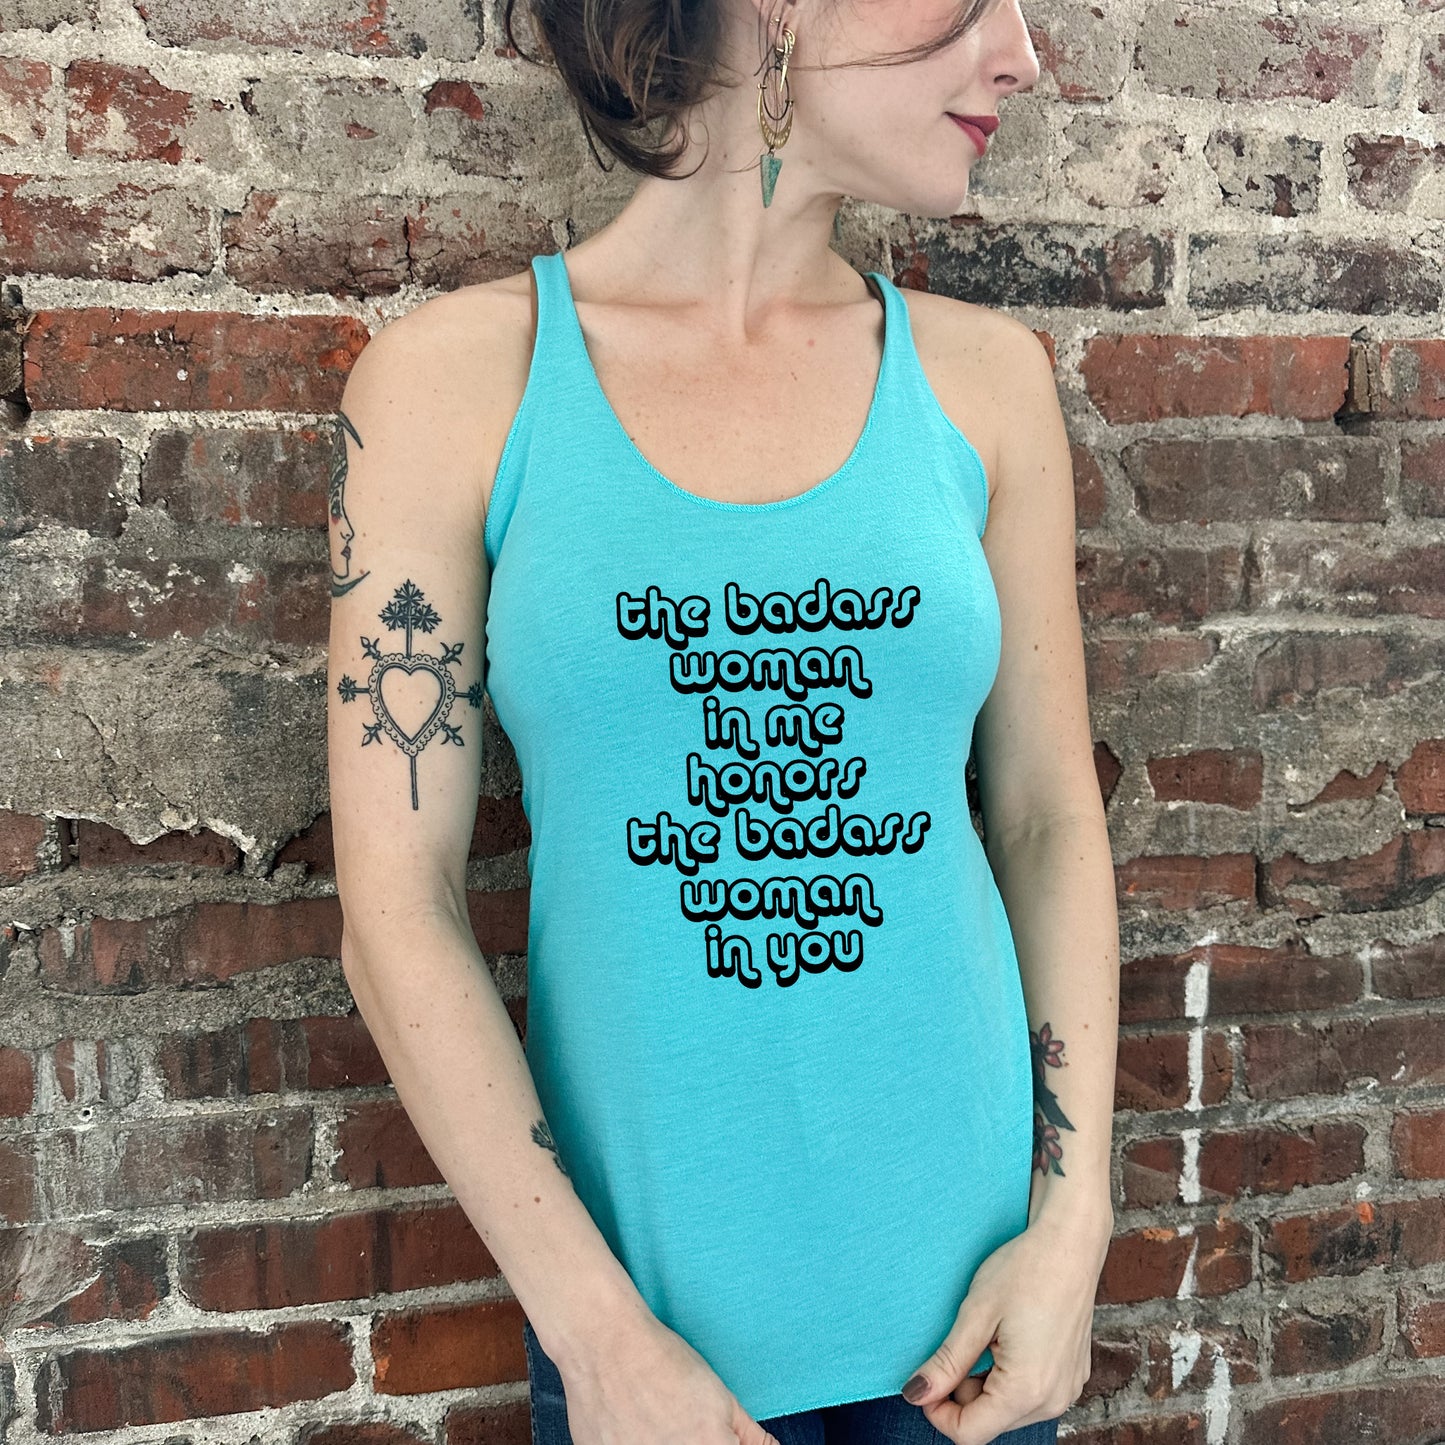 The Badass Woman in Me Honors the Badass Woman in You - Women's Tank - Heather Gray, Tahiti, or Envy